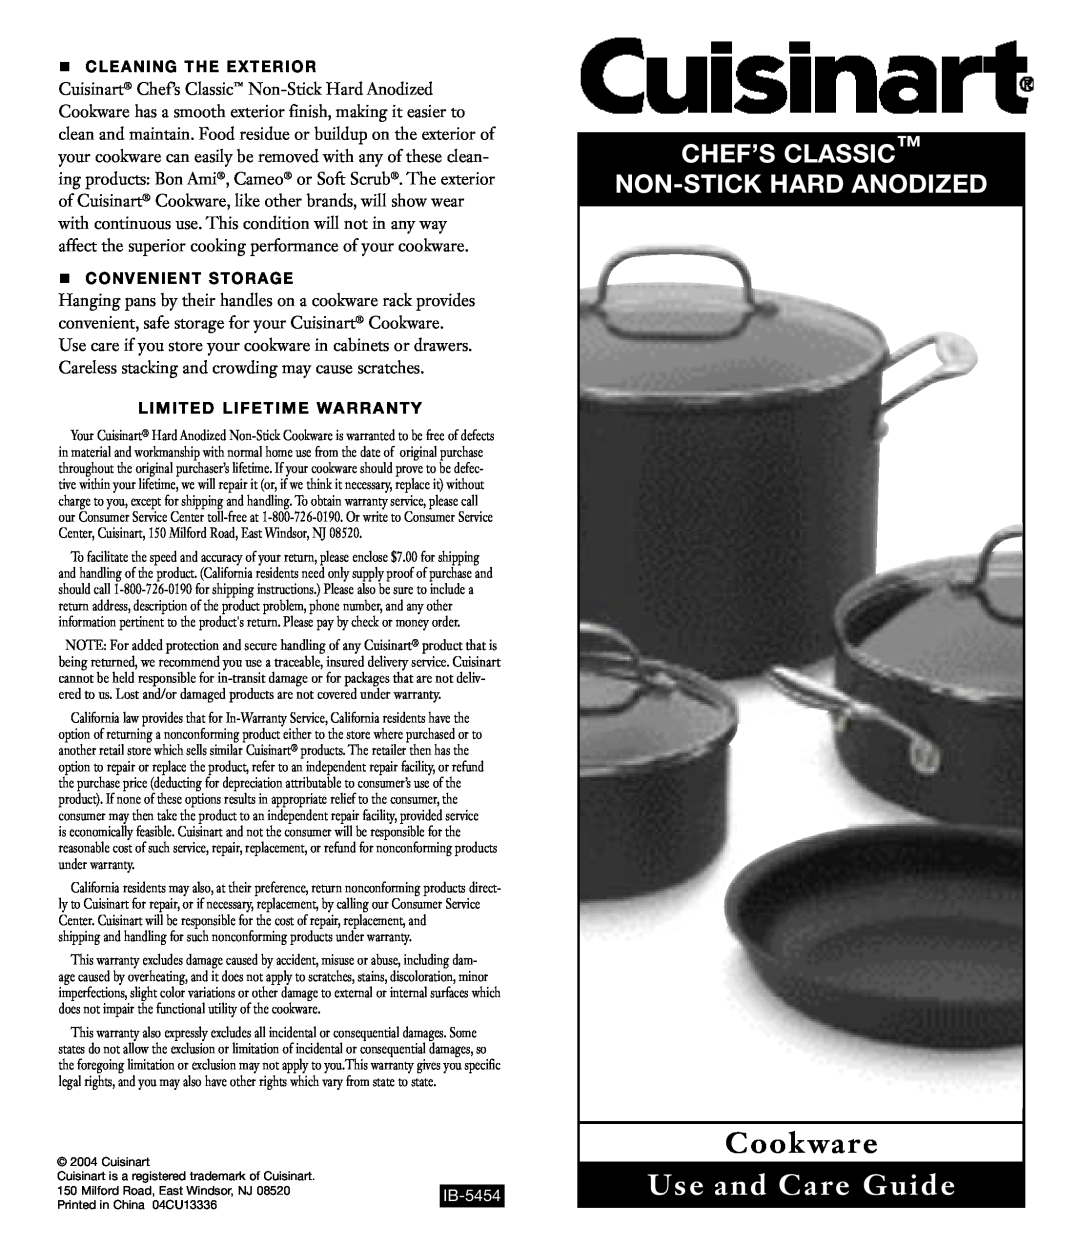 Cuisinart 66-17 n CLEaning the exterior, n CONVENIENT STORAGE, Limited Lifetime Warranty, Cookware, Use and Care Guide 